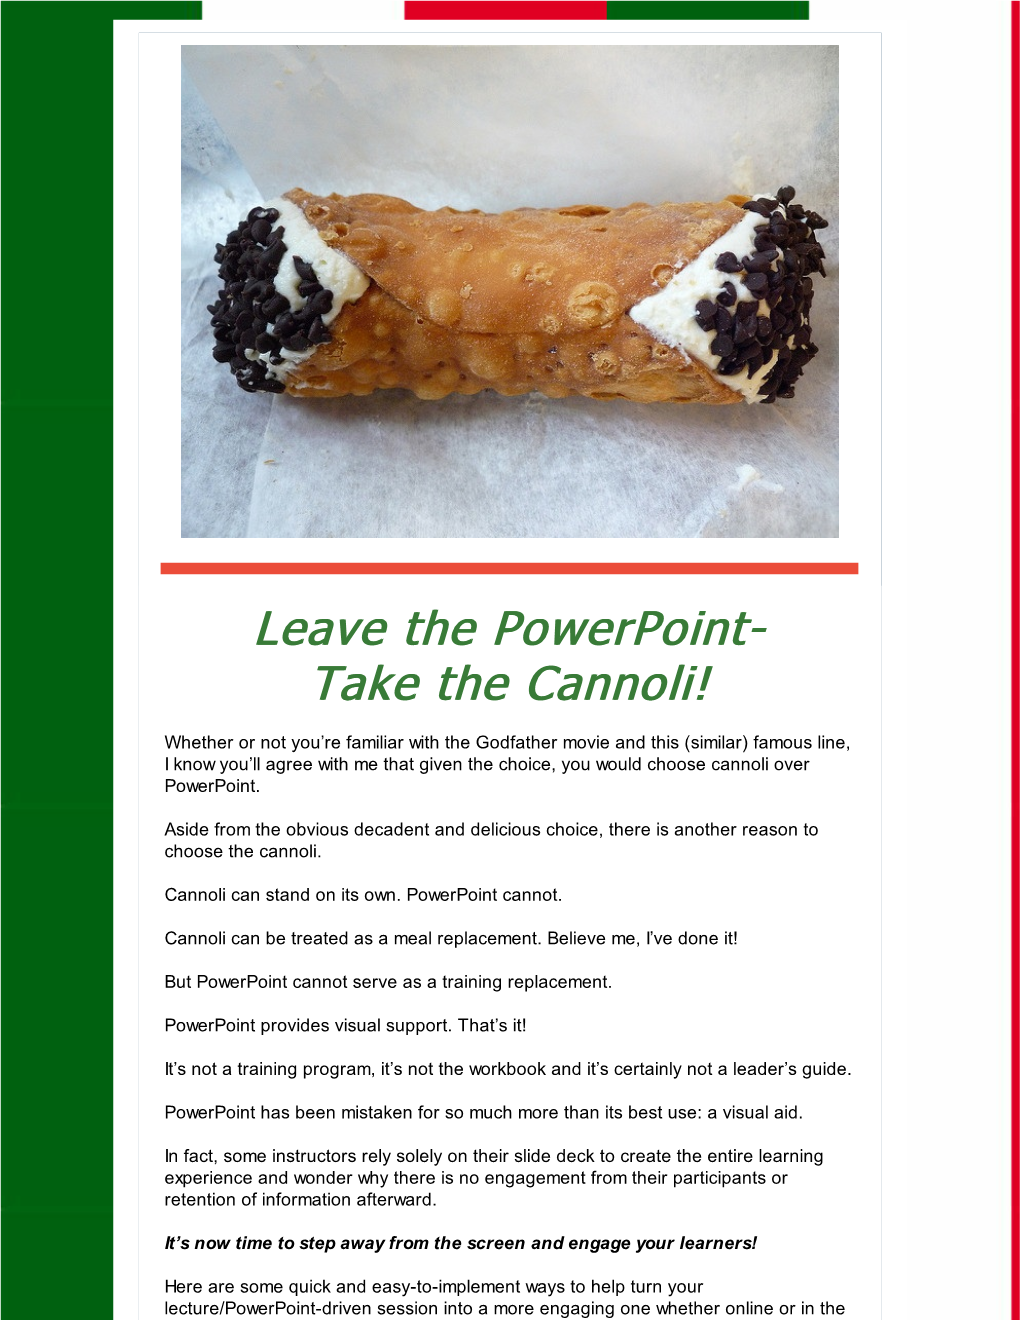 Leave the Powerpoint- Take the Cannoli!